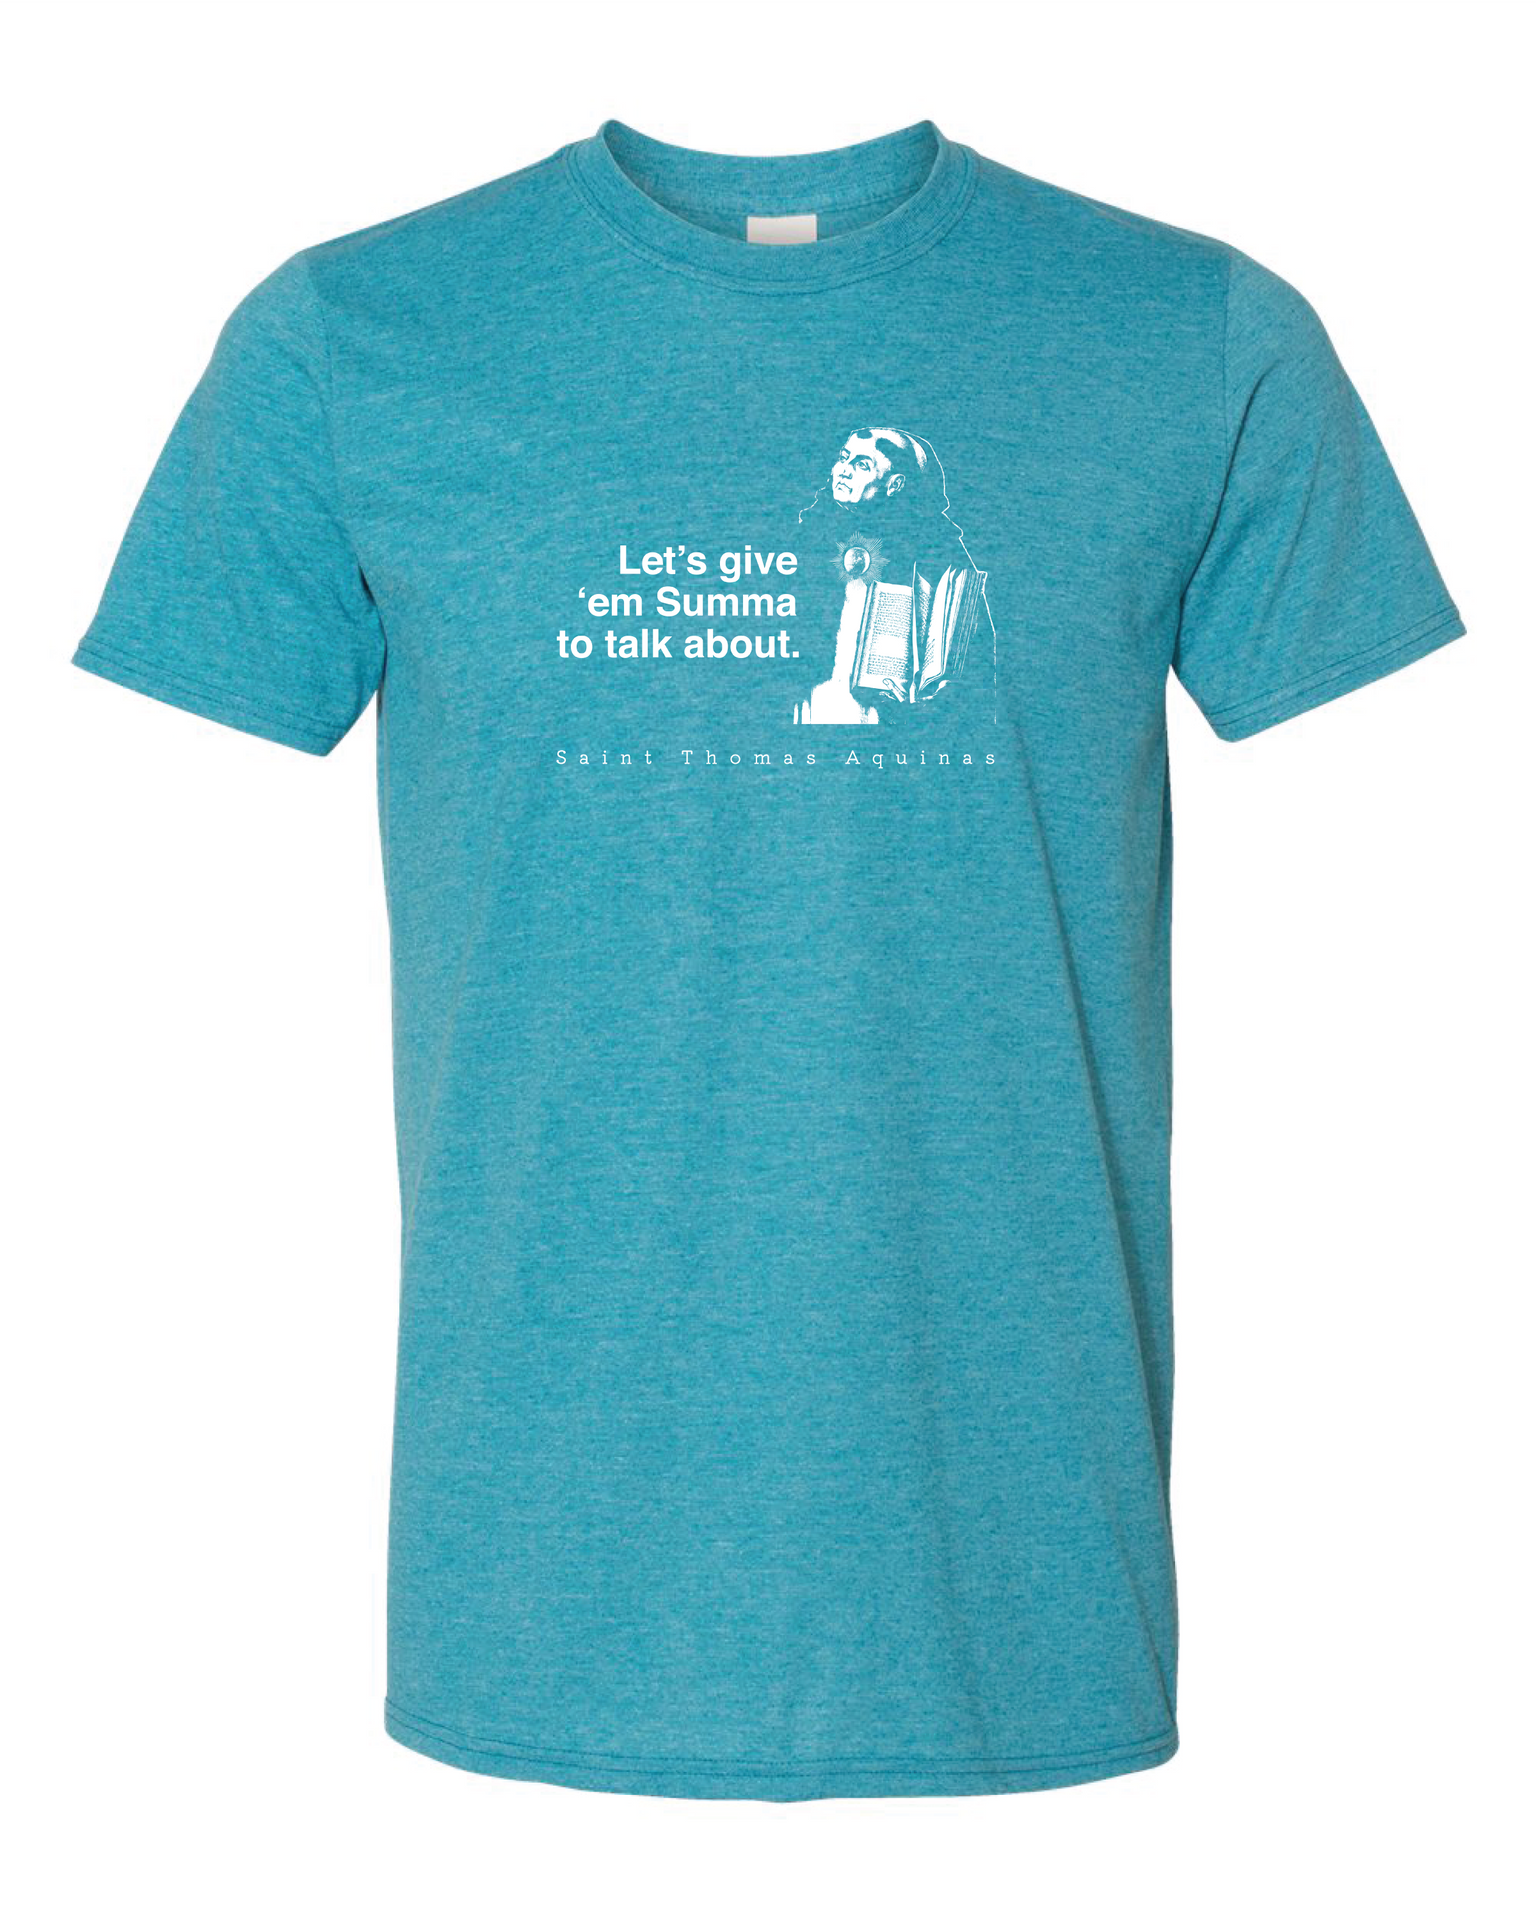 Let's Give 'em Summa to Talk About - St. Thomas Aquinas T Shirt